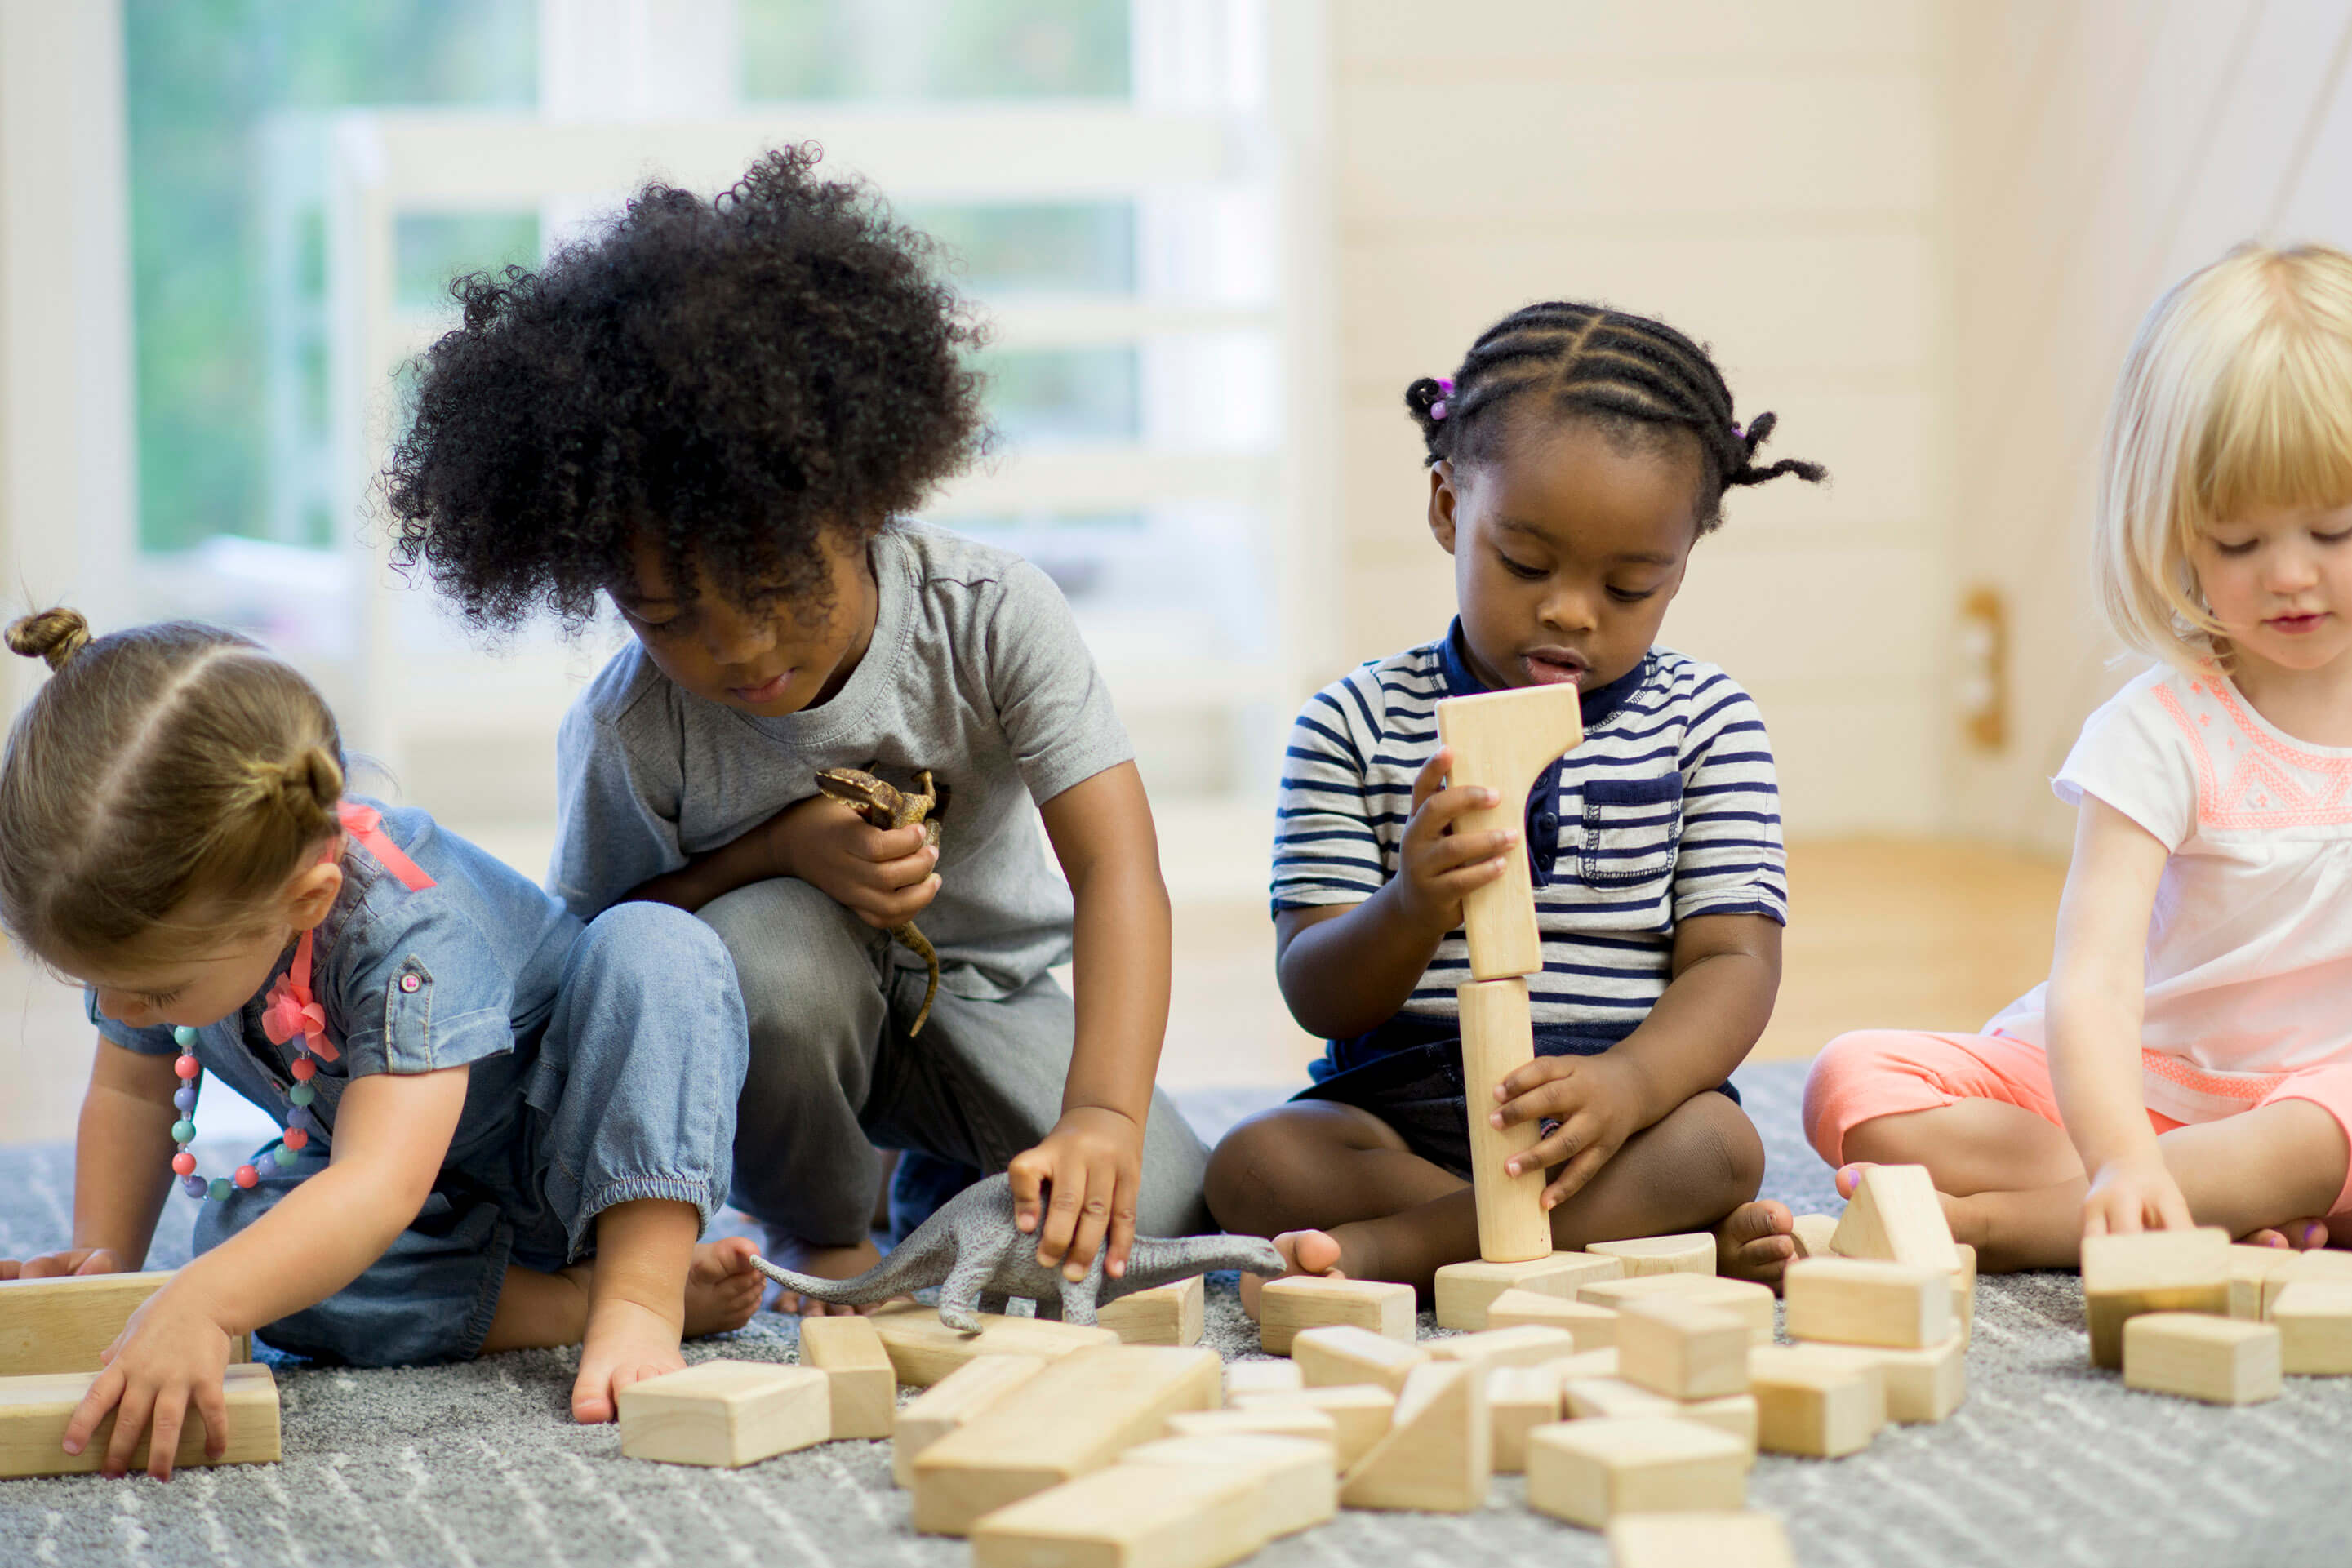 Four toddlers playing on the floor with blocks